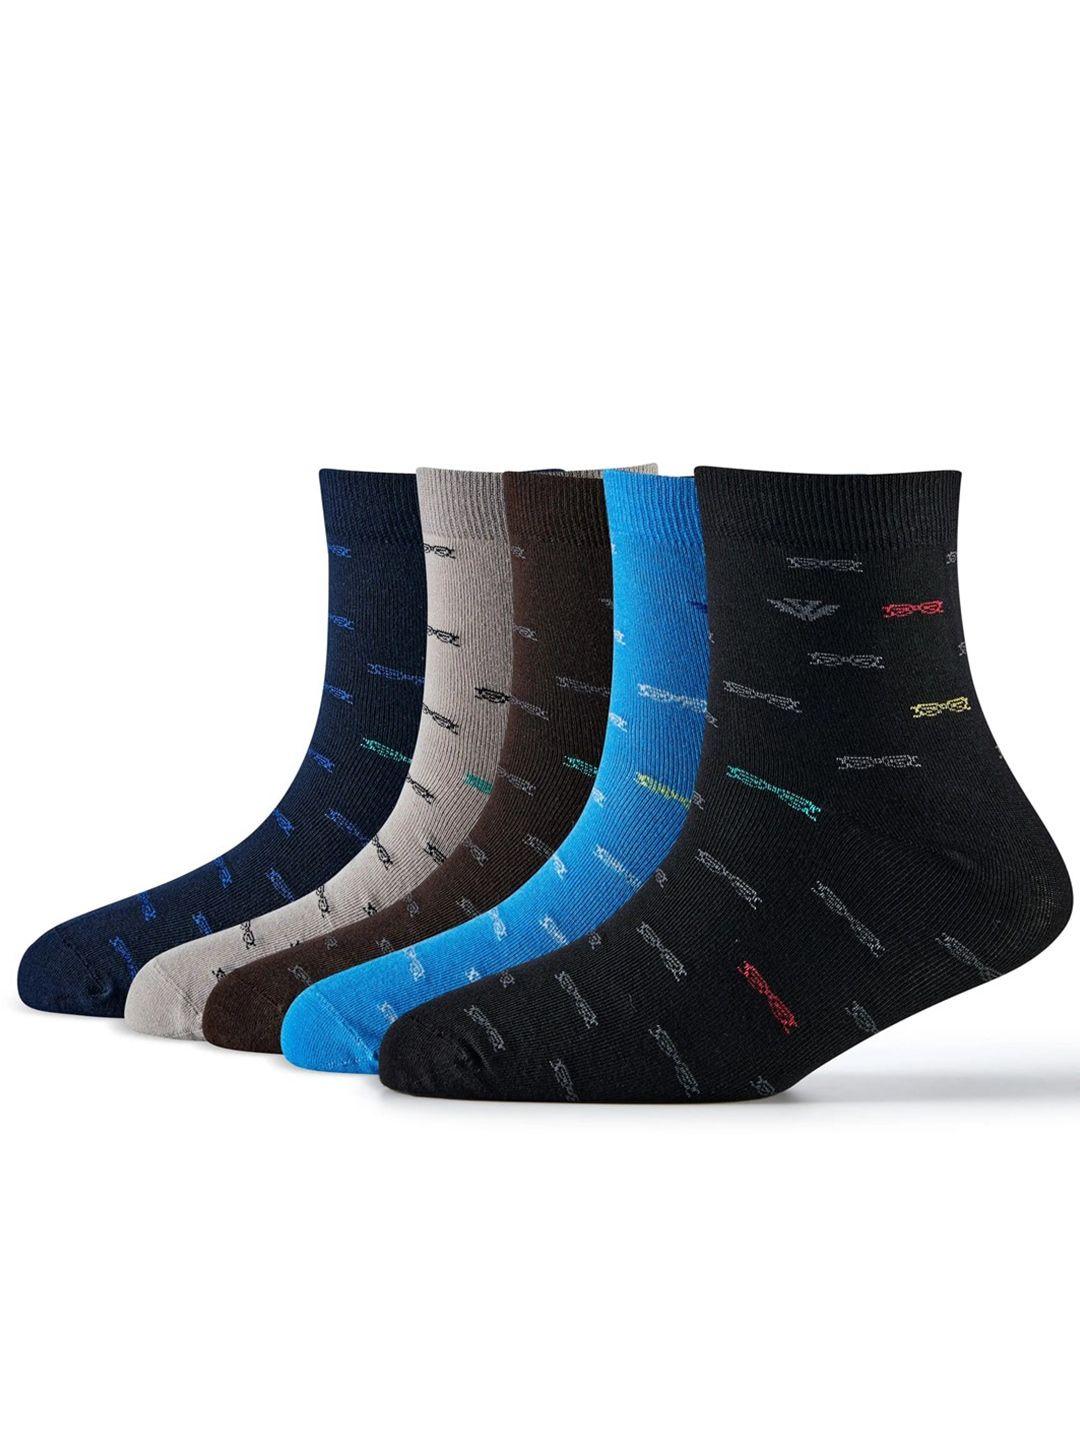 cotstyle-pack-of-5-patterned-ankle-length-socks